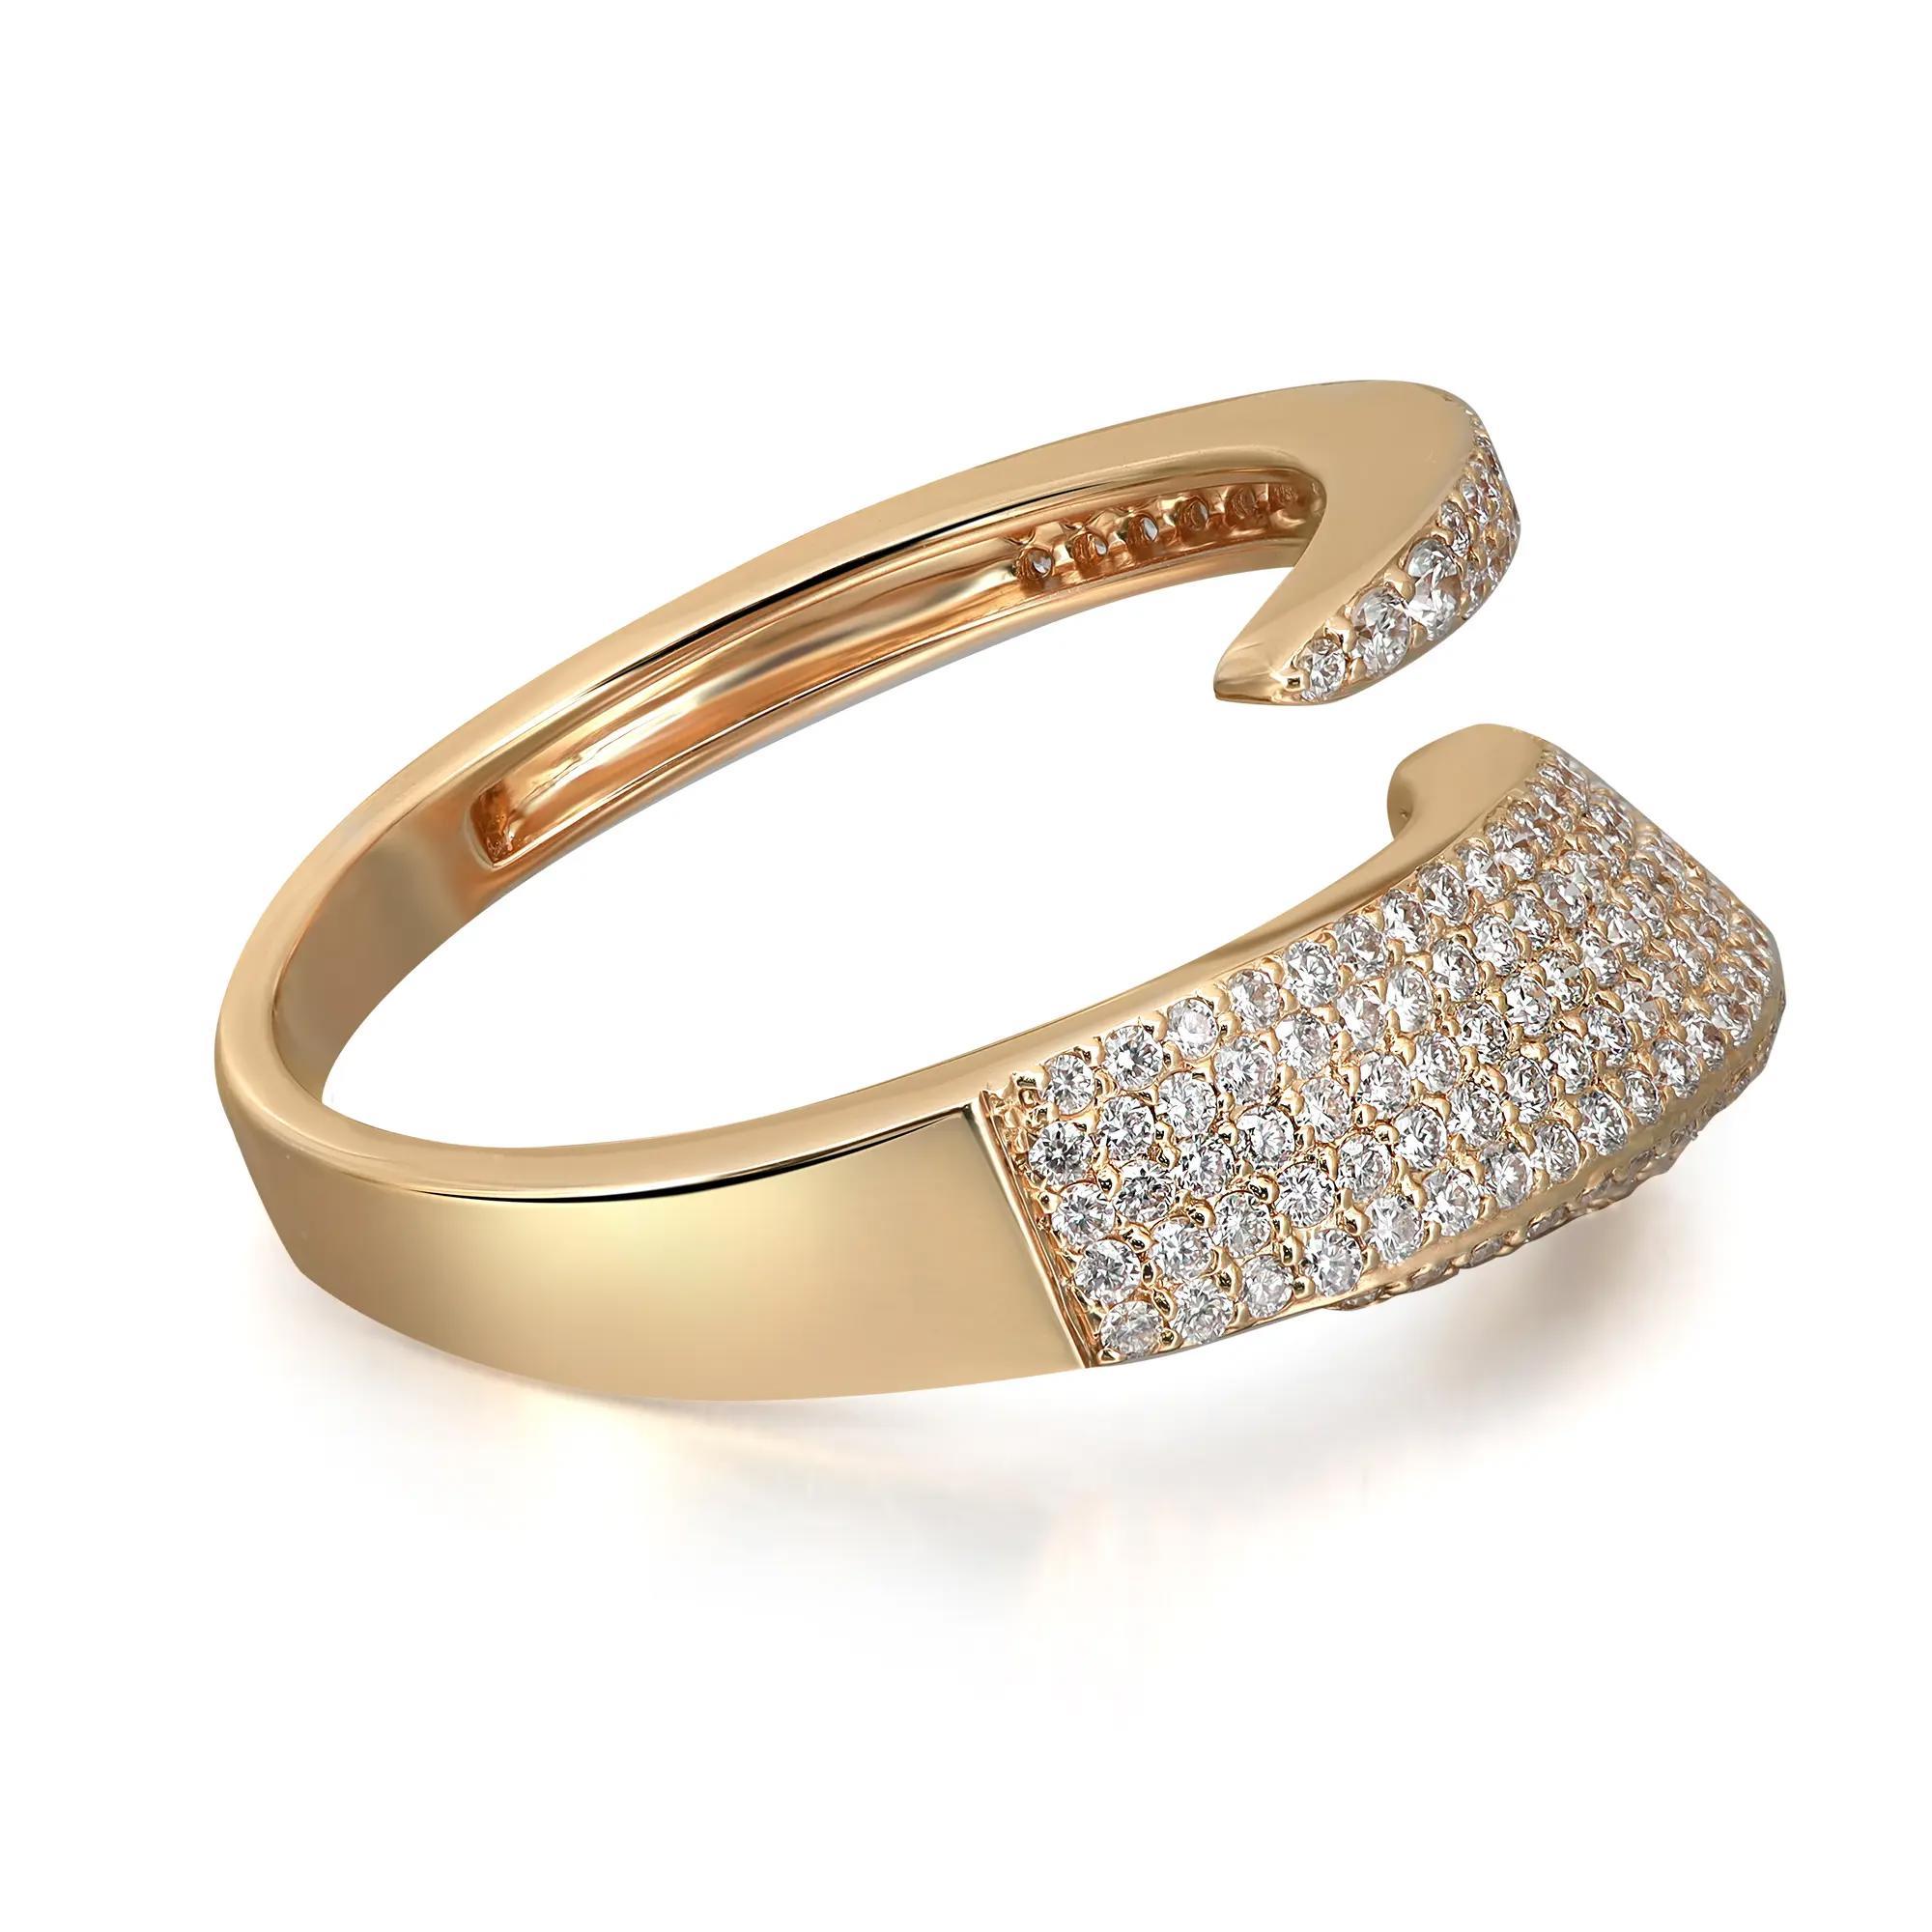 For Sale:  0.74 Carat Pave Diamond Wrap Ring 18K Yellow Gold   4